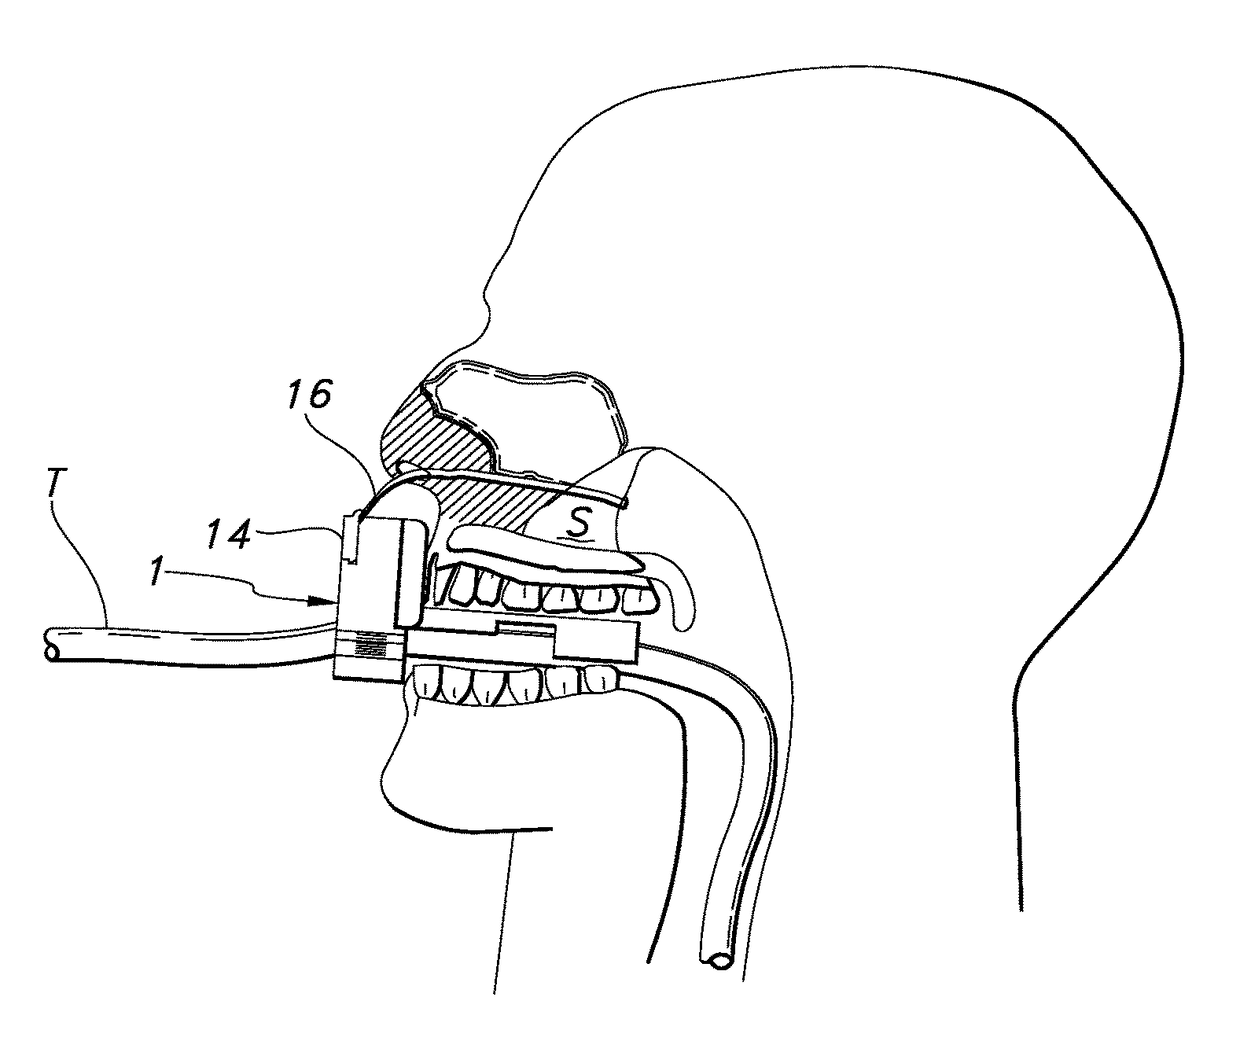 Device for securing an oral tube in a patient